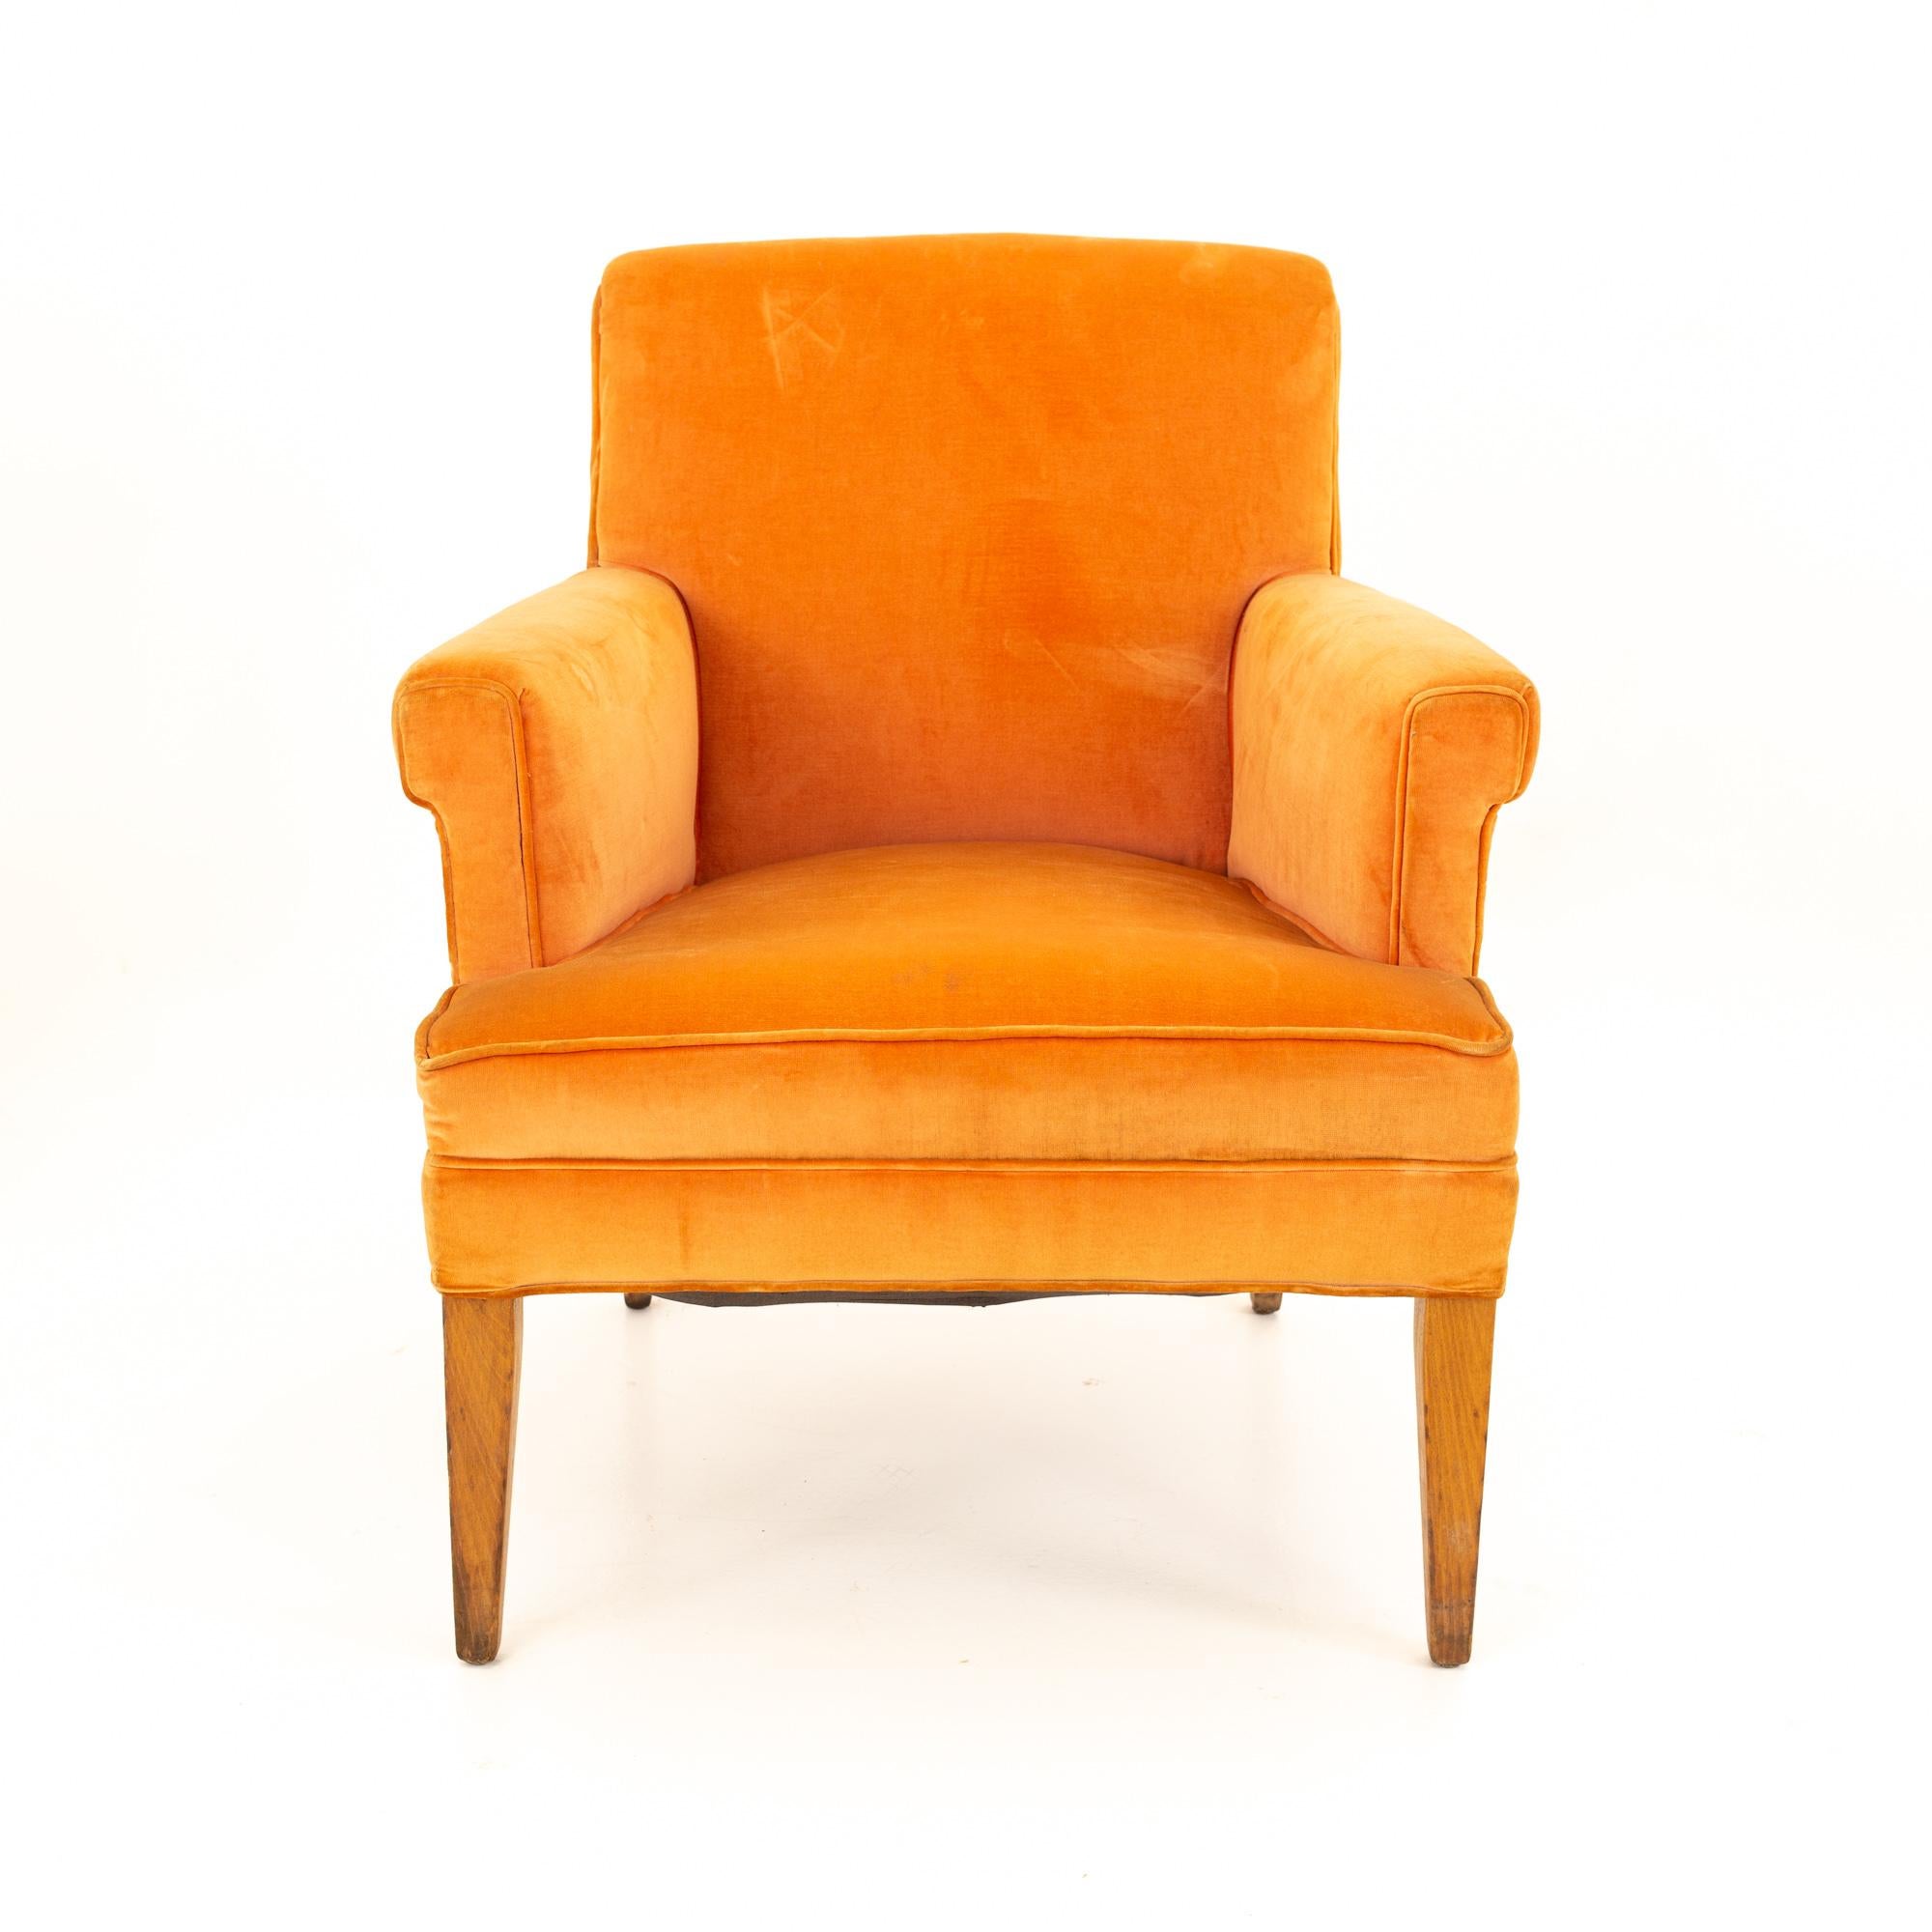 Mid Century orange velvet lounge chair
Chair measures: 26.5 wide x 29.5 deep x 31.5 high, with a seat height of 16.5 inches

All pieces of furniture can be had in what we call restored vintage condition. This means the piece is restored upon